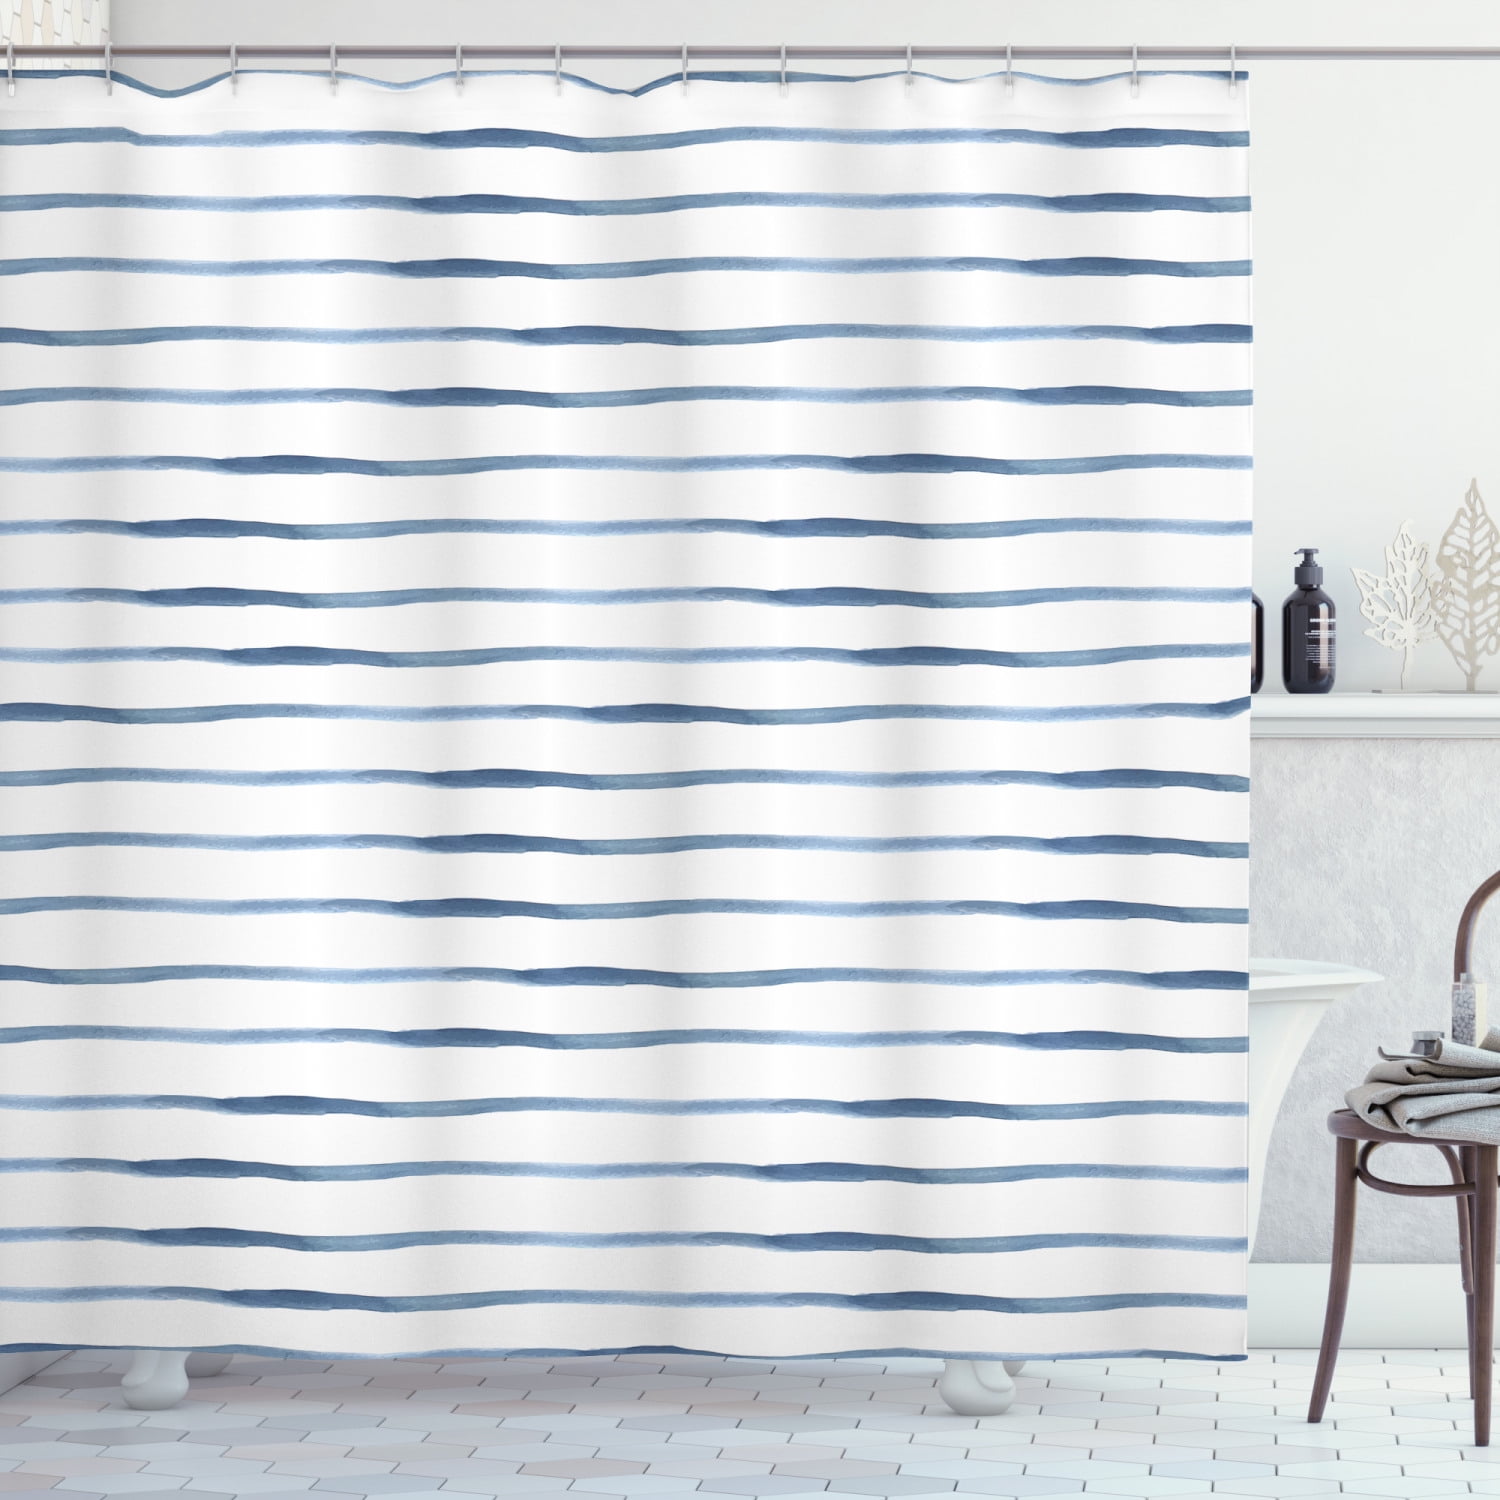 Harbour Stripe Shower Curtain Abstract, Ocean Shower Curtain Bed Bath And Beyond